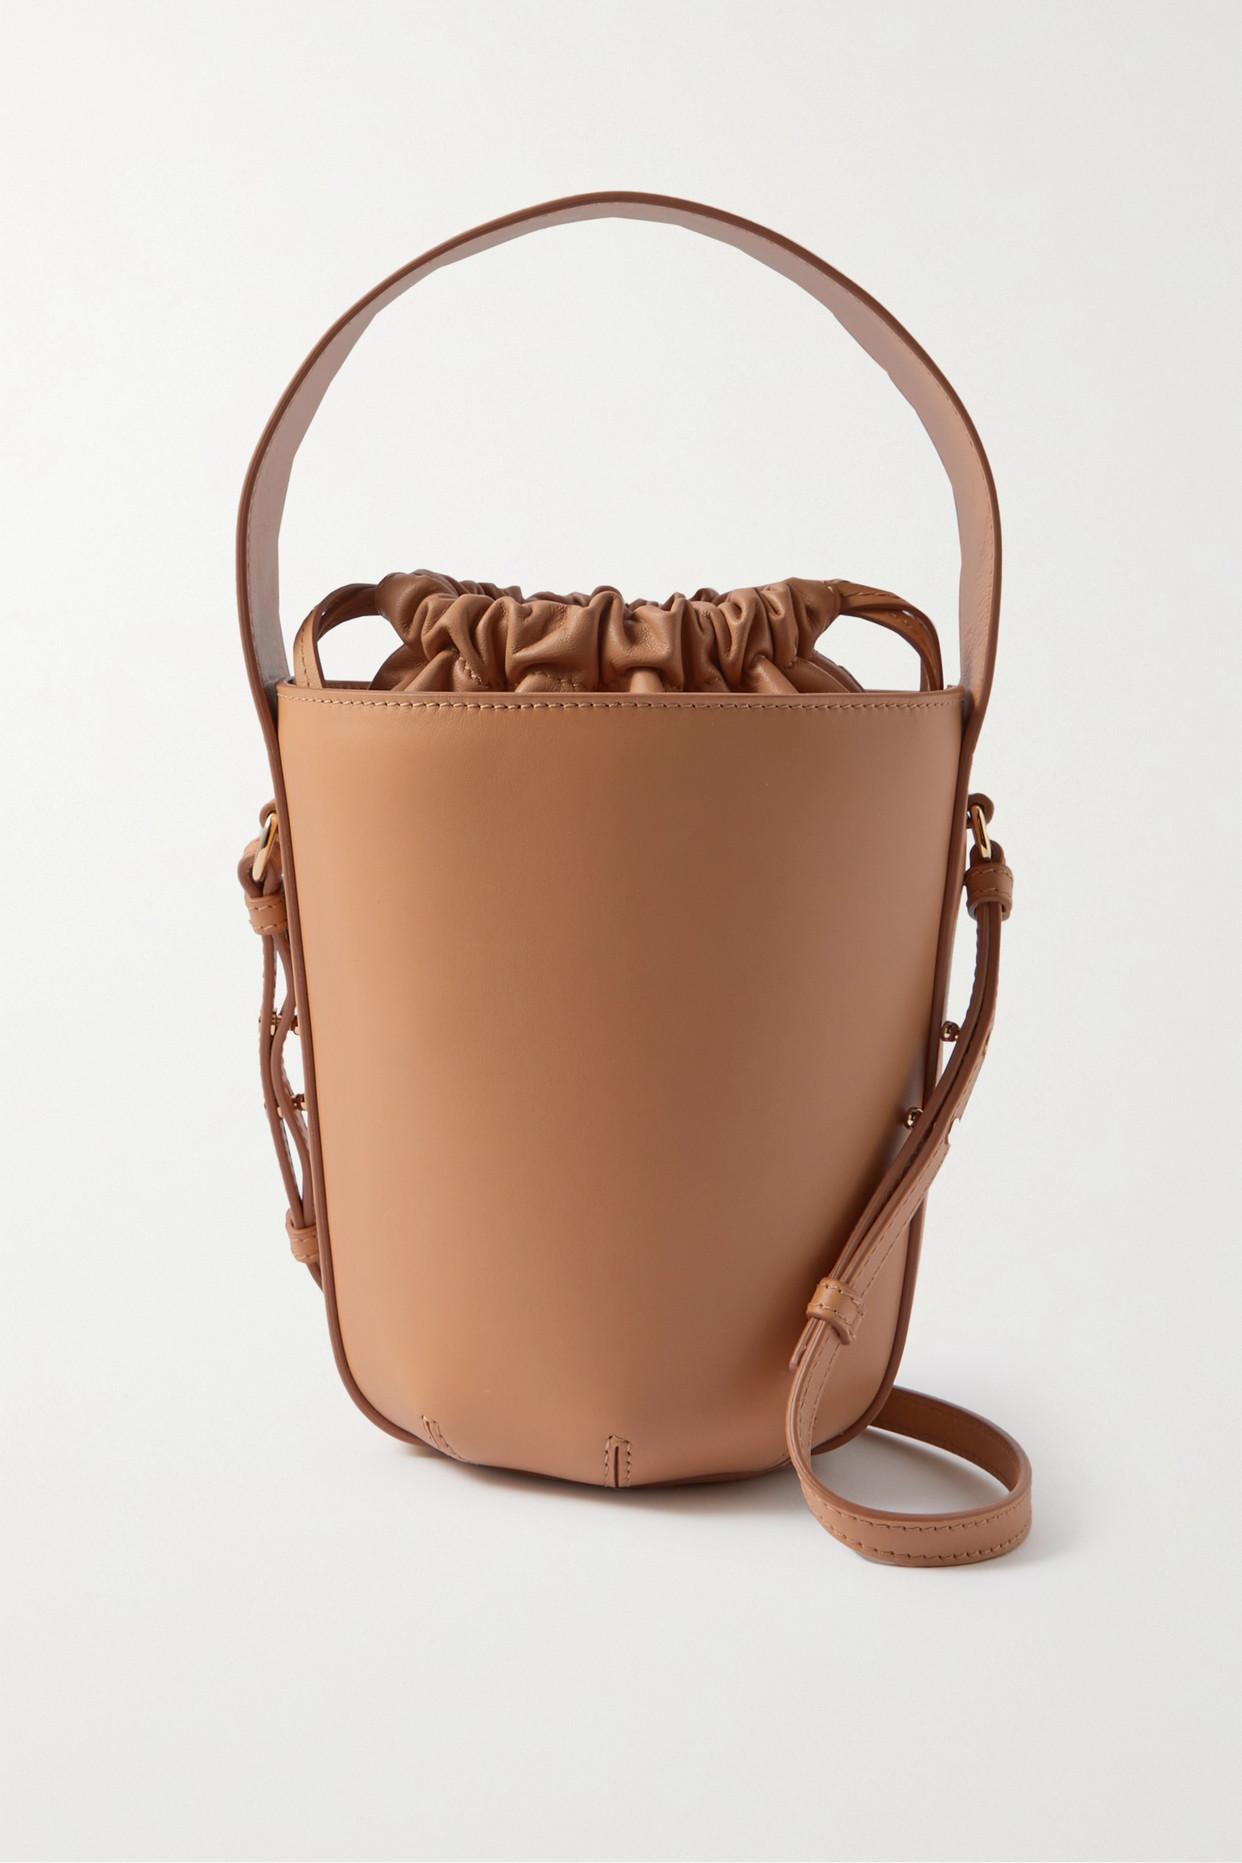 Chloé Sense Embroidered Leather Bucket Bag in Brown | Lyst